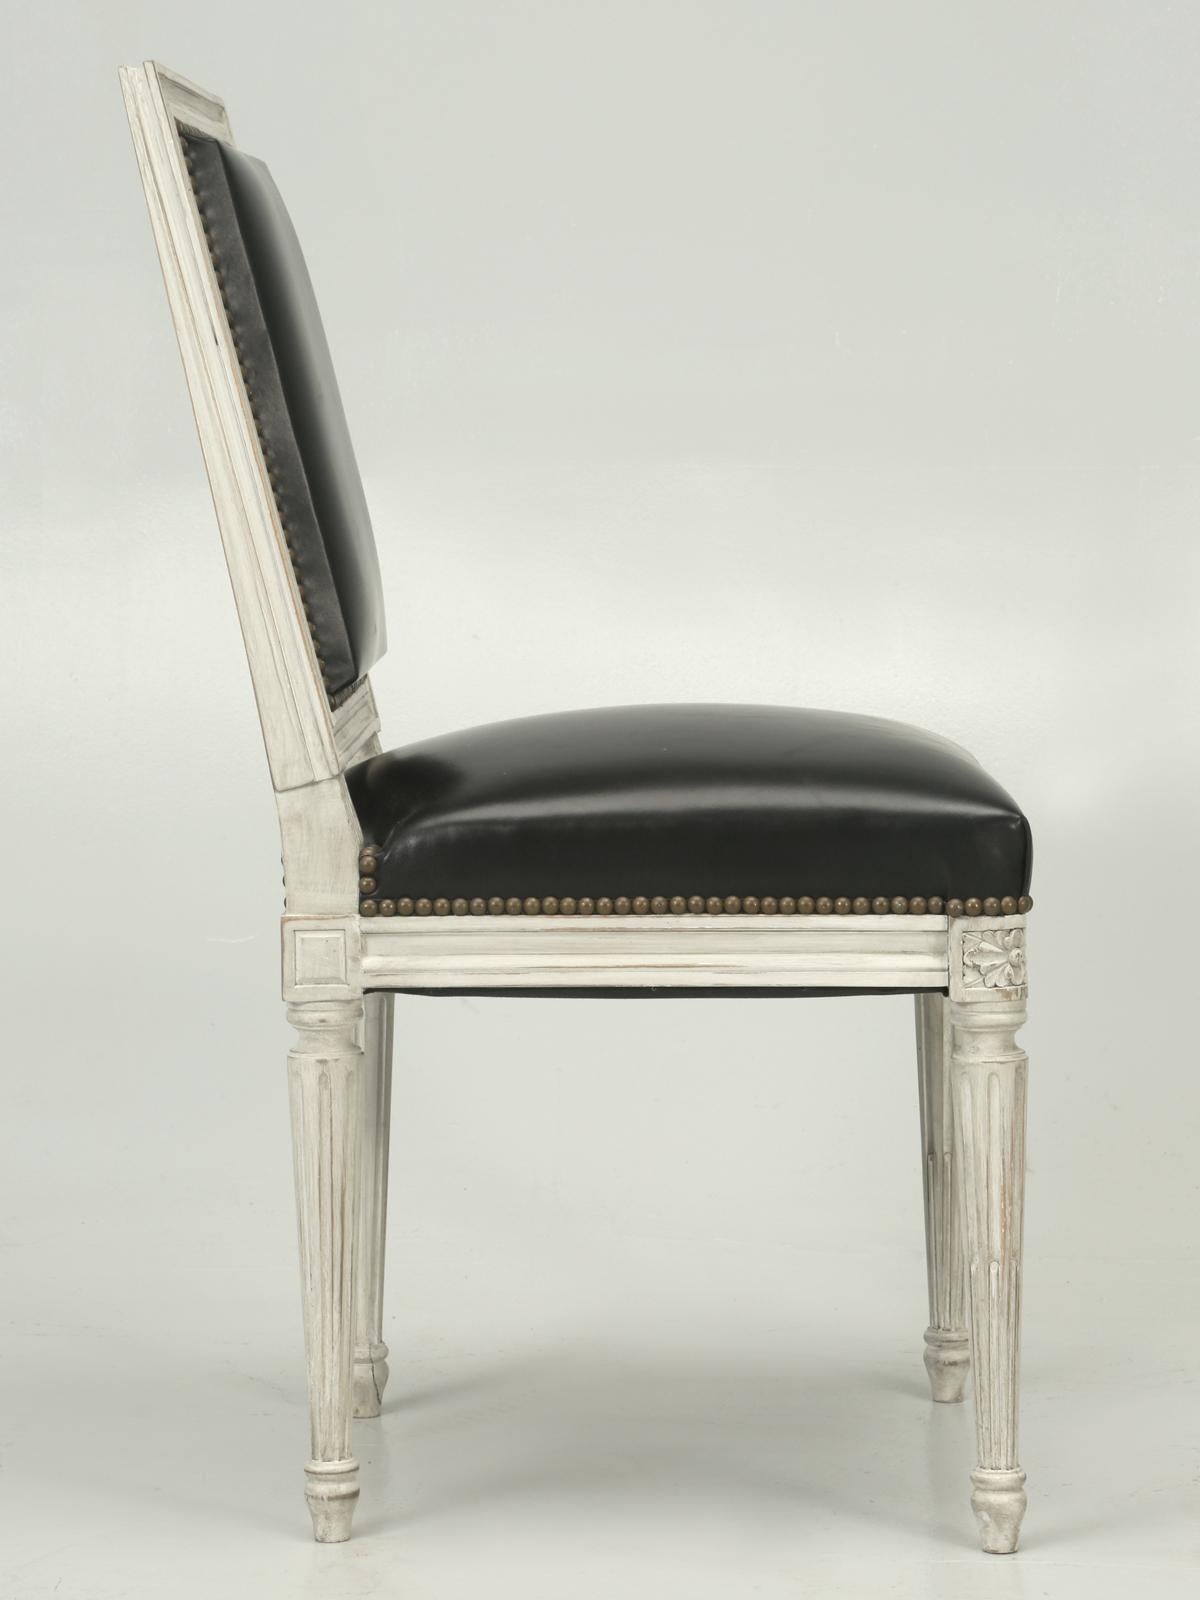 French Handmade, Louis XVI Style Chairs, Aged White/Gray Paint & Black Leather For Sale 2